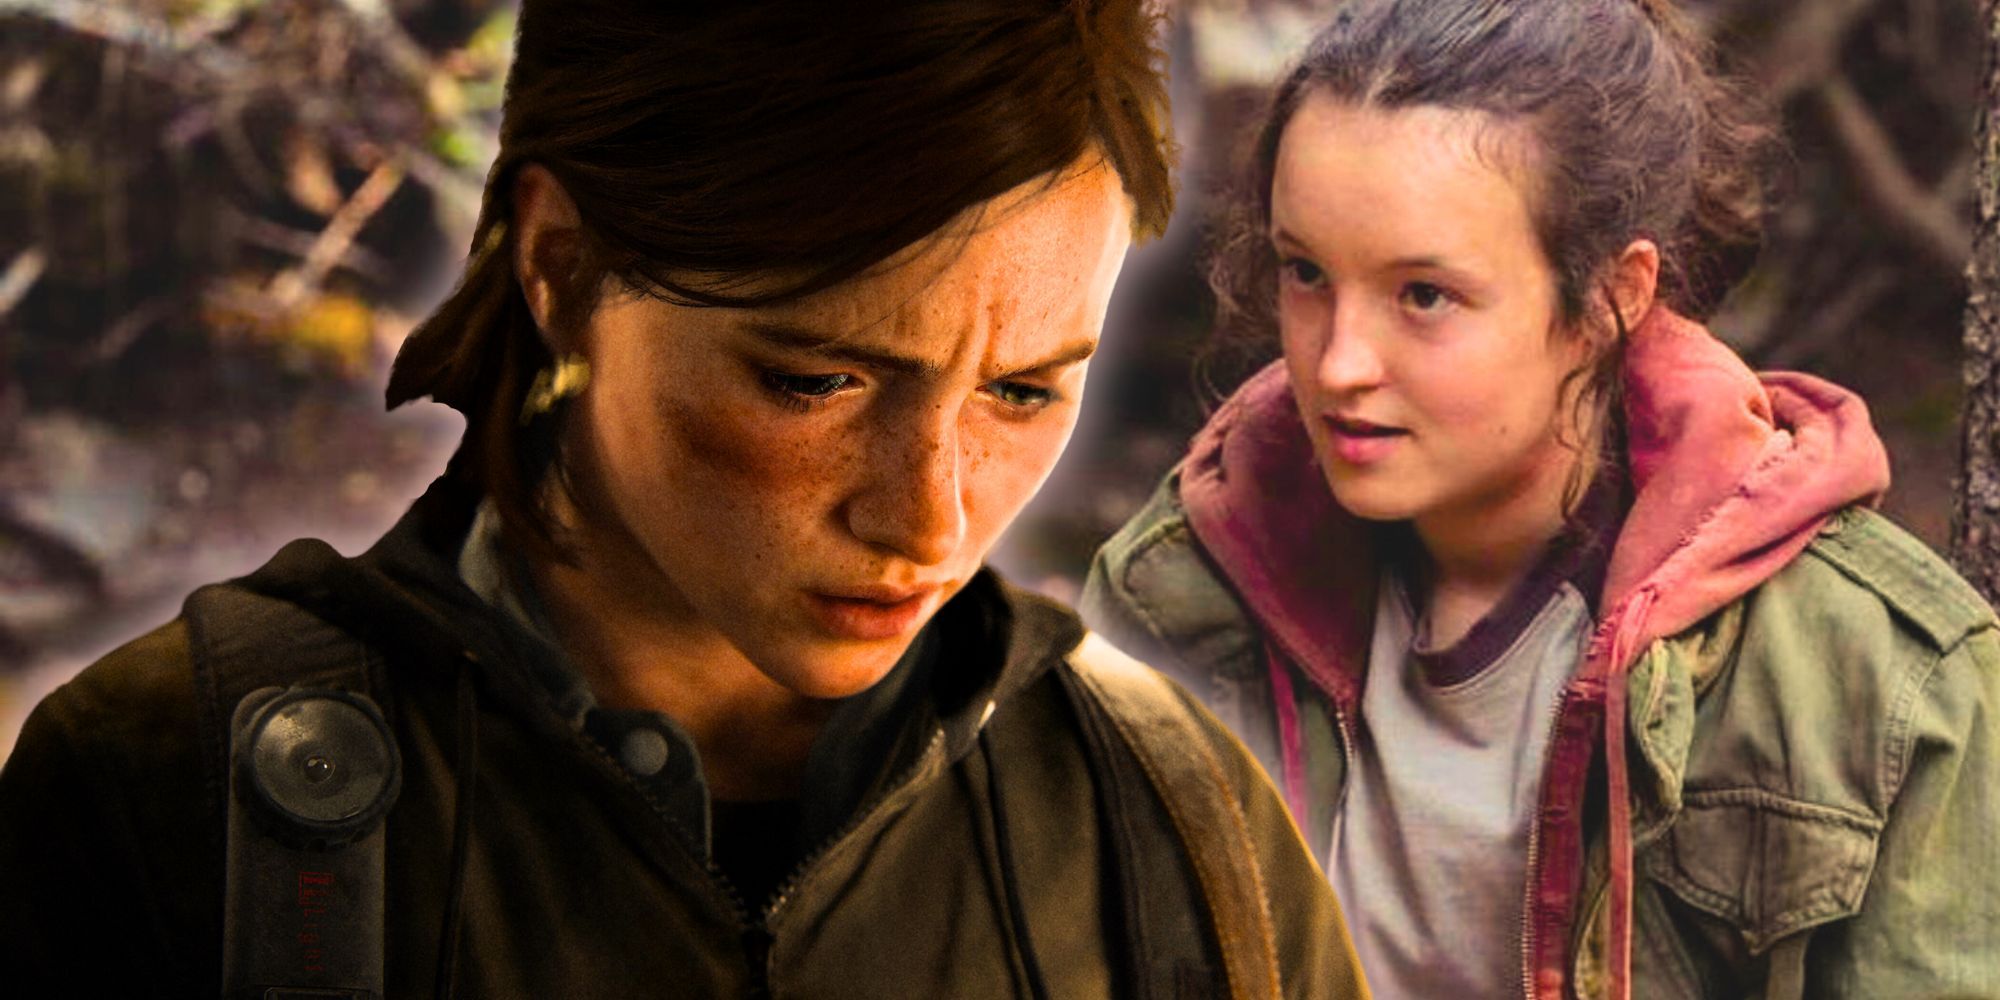 Ellie from The Last of Us Part 2 and Bella Ramsey as Ellie in TLOU on HBO